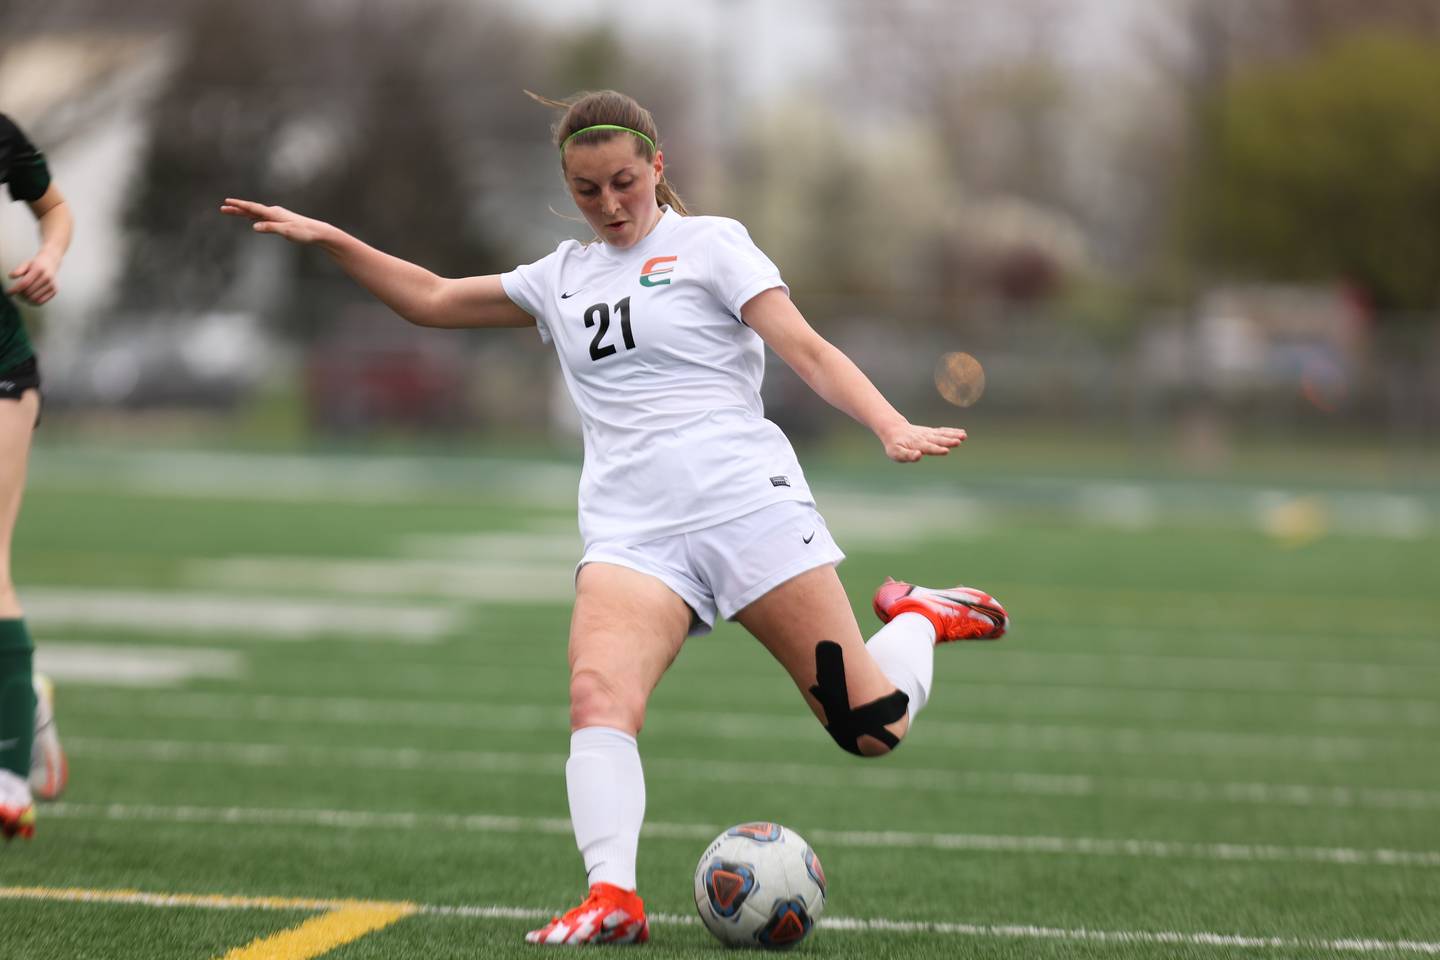 Plainfield East’s Kelli Coughlin takes a shot against Plainfield Central. Friday, April 29, 2022, in Plainfield.